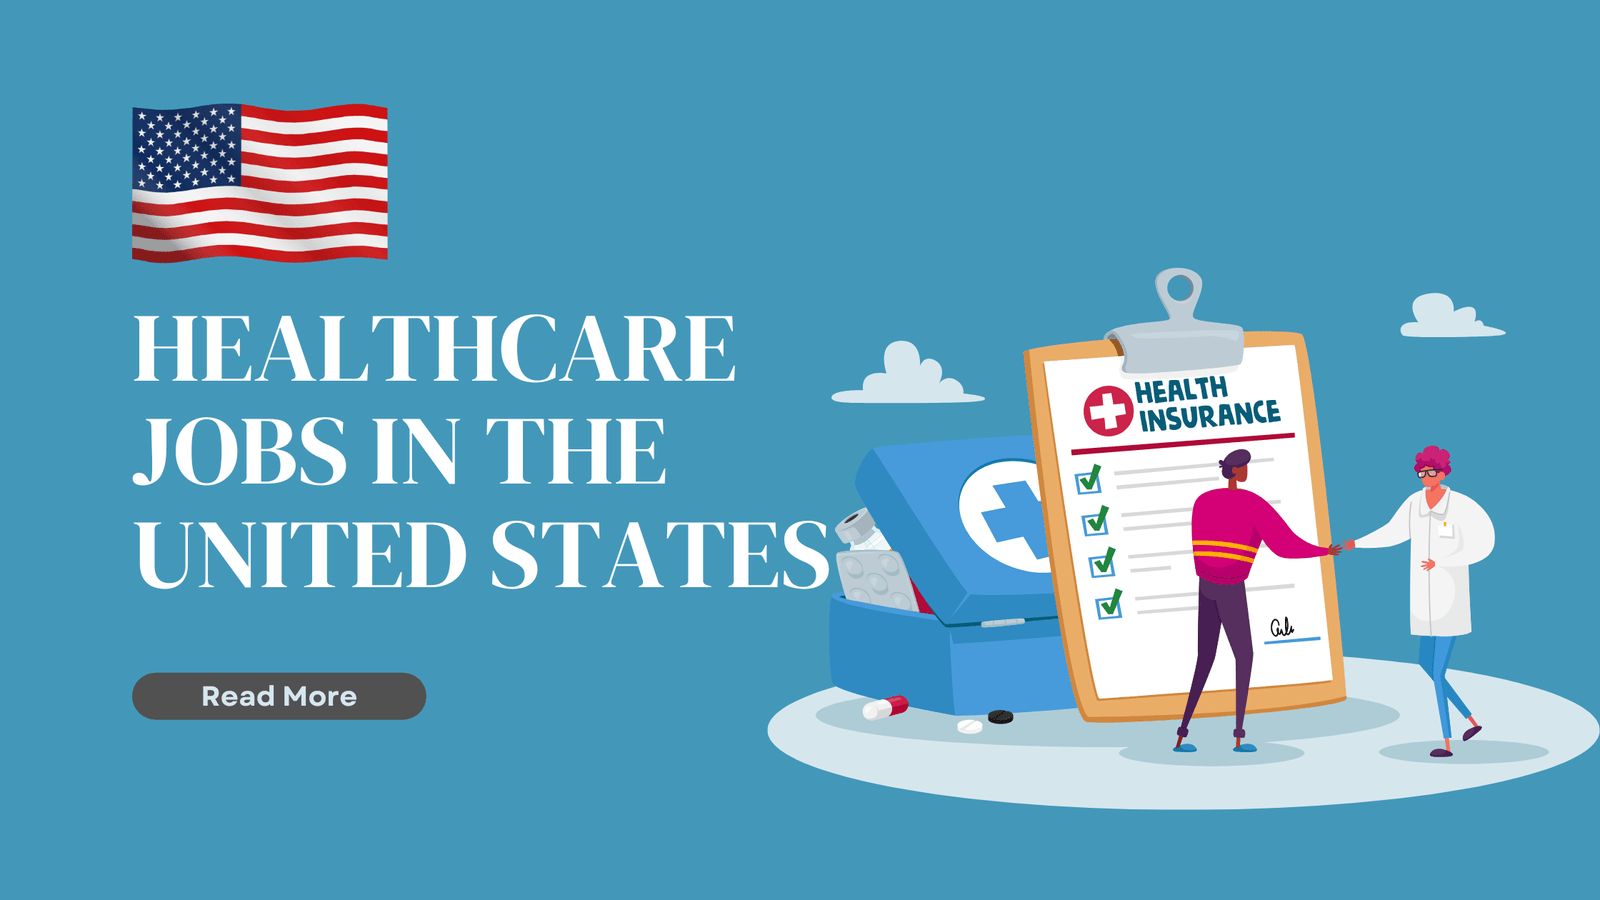 Healthcare Jobs in the United States